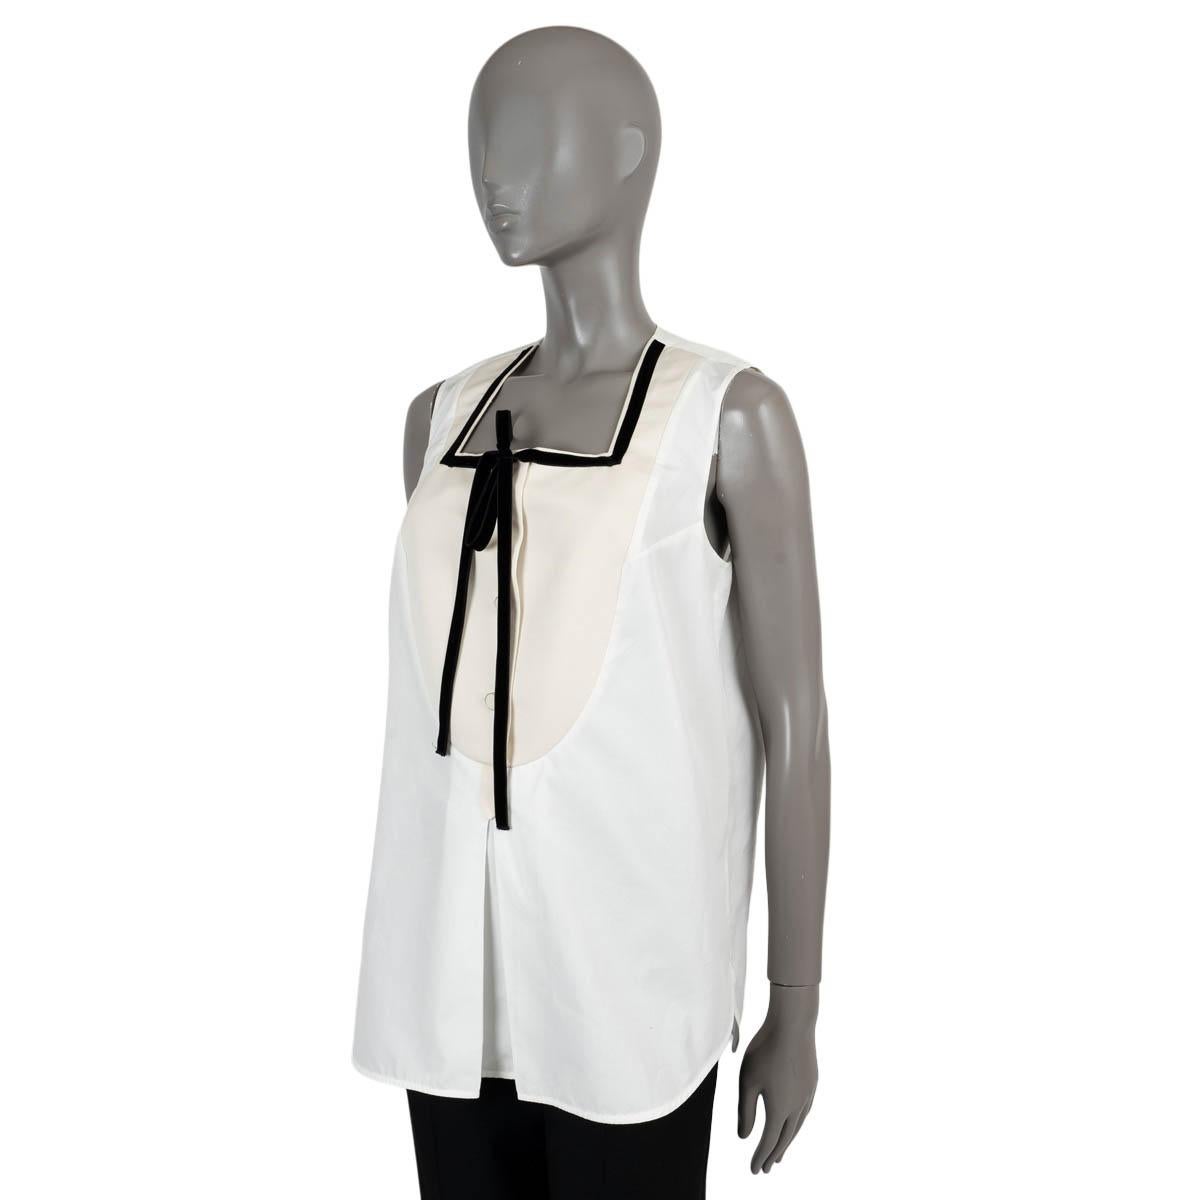 100% authentic Louis Vuitton sleeveless bip poplin blouse in white cotton (100%). The design features a cream grosgrain insert with buttons, with a black velvet trim and front box pleat. Unlined. Has been worn and is in excellent condition.